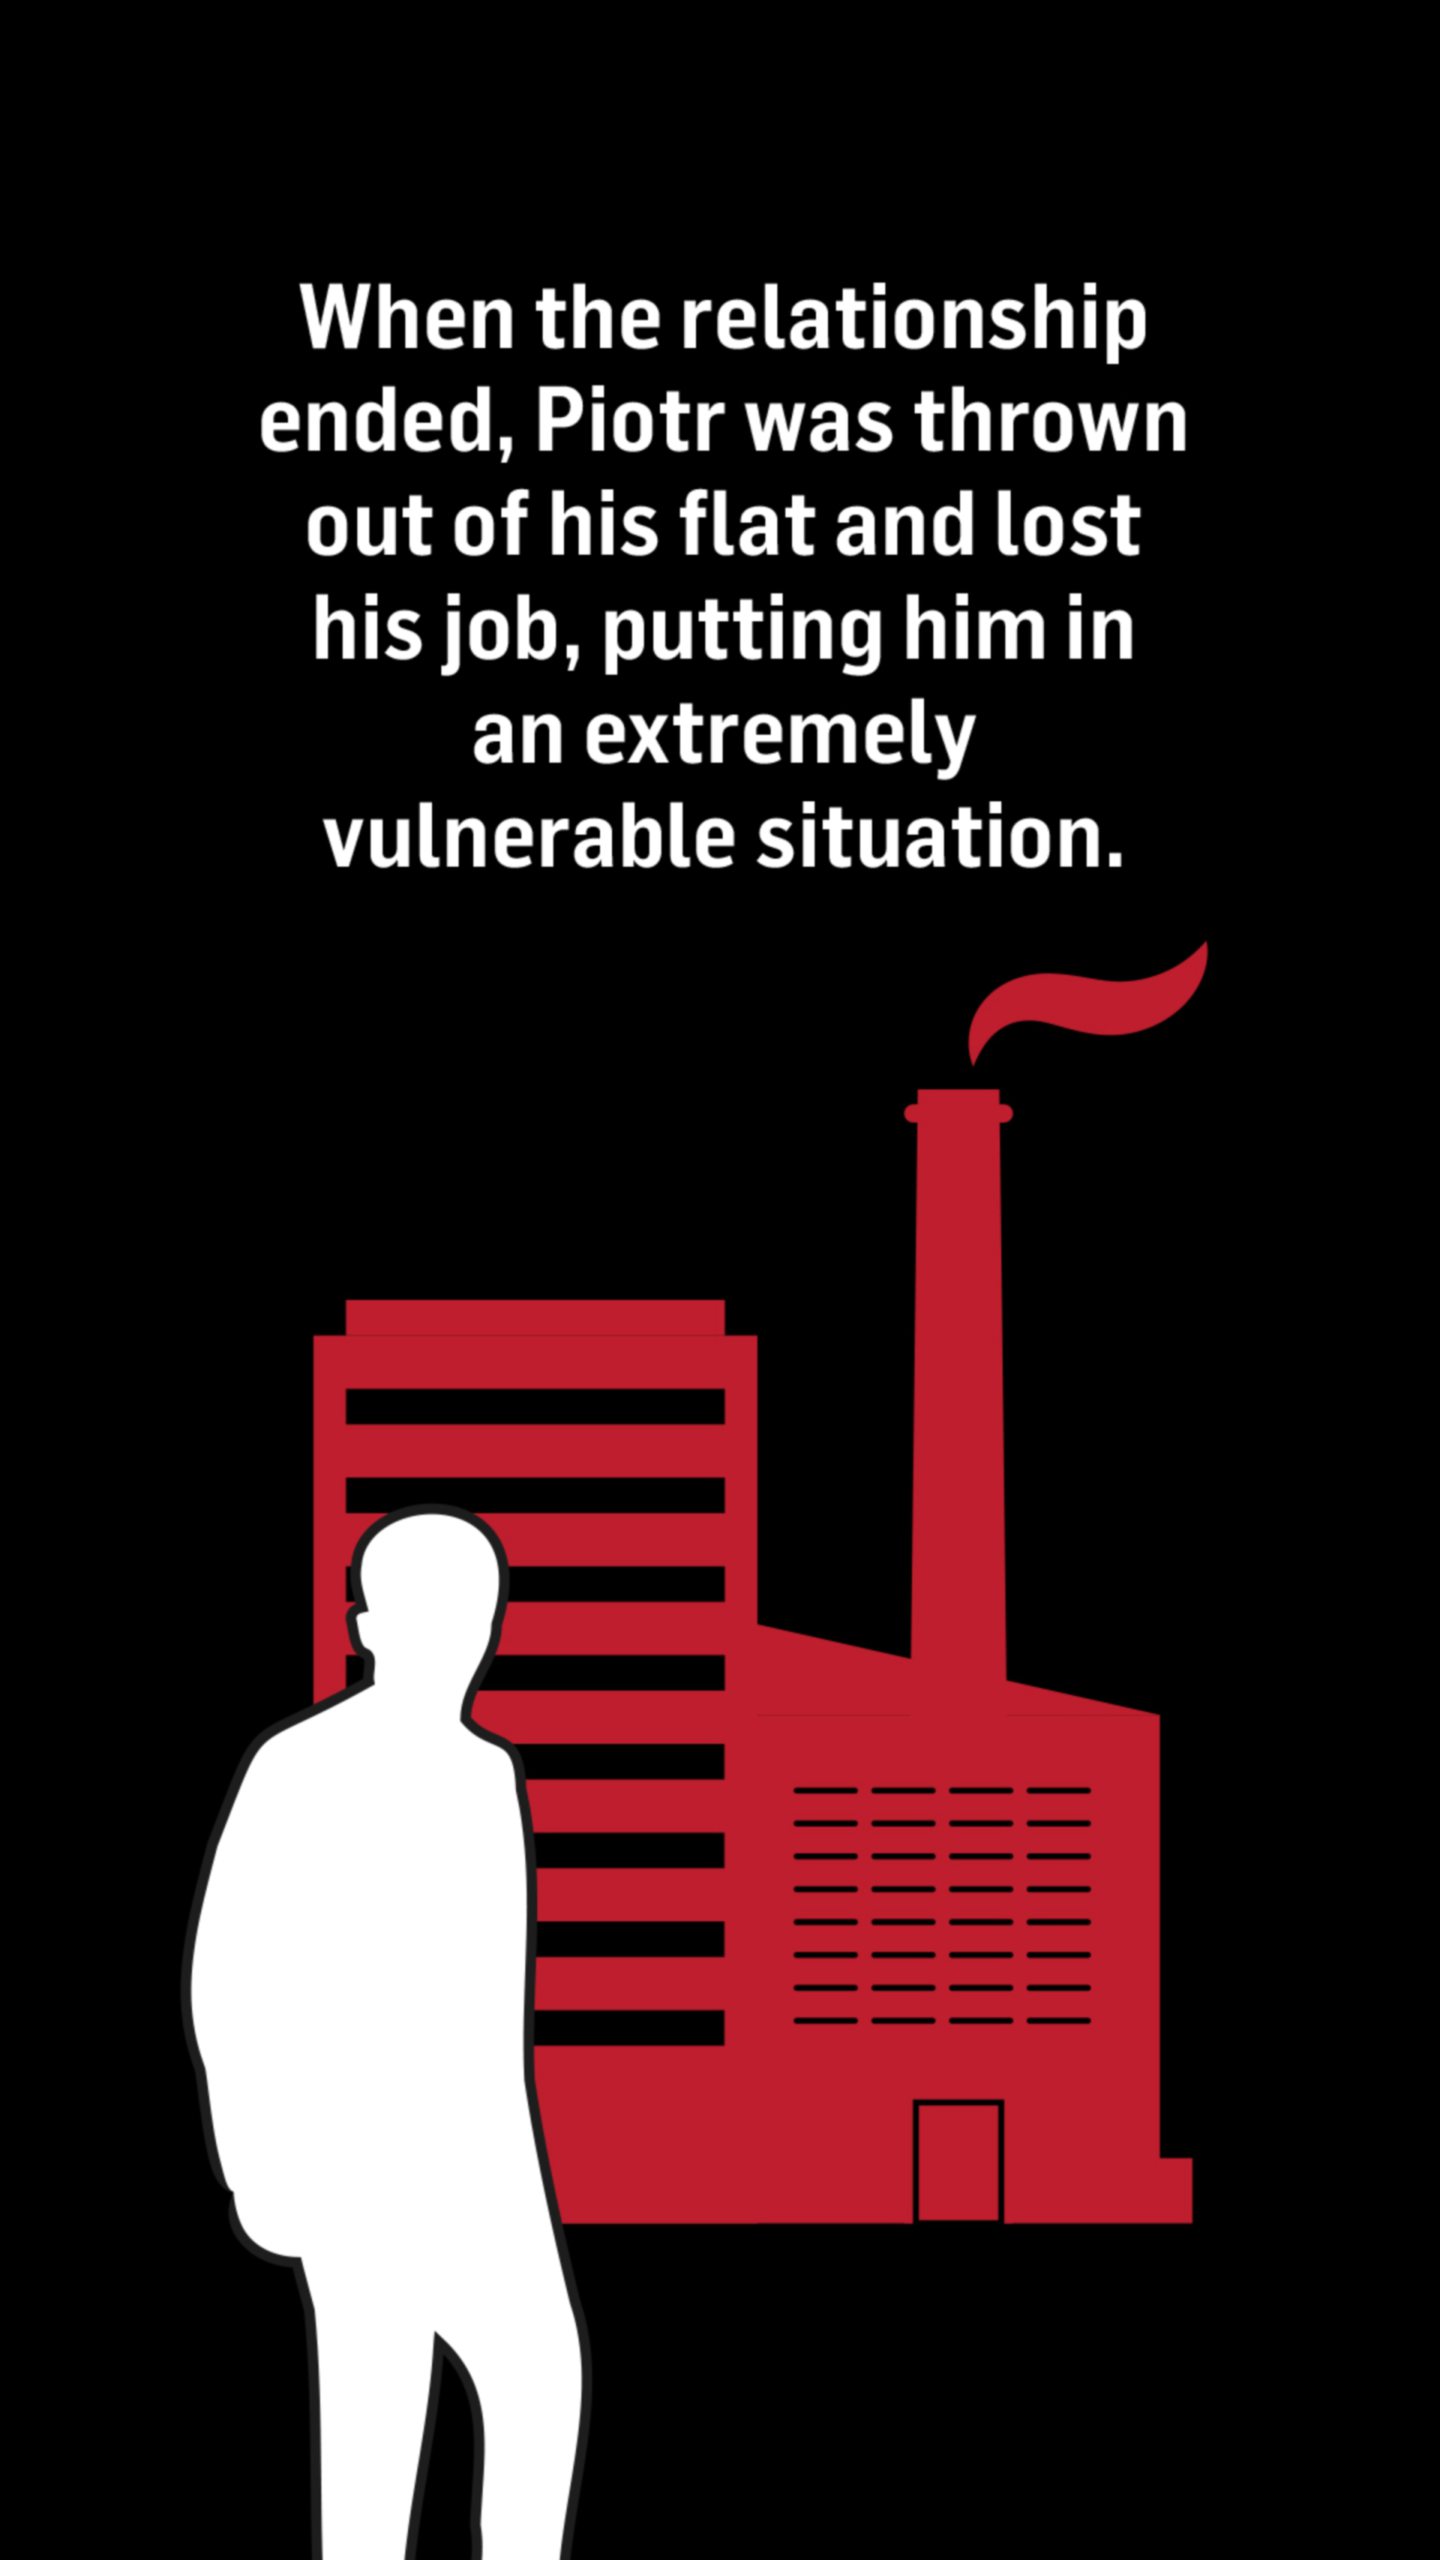 An illustration of a man standing in front of a silhouette of a factory. Words above the image read: When the relationship ended, Piotr was thrown out of his flat and lost his job, putting him in an extremely vulnerable situation.